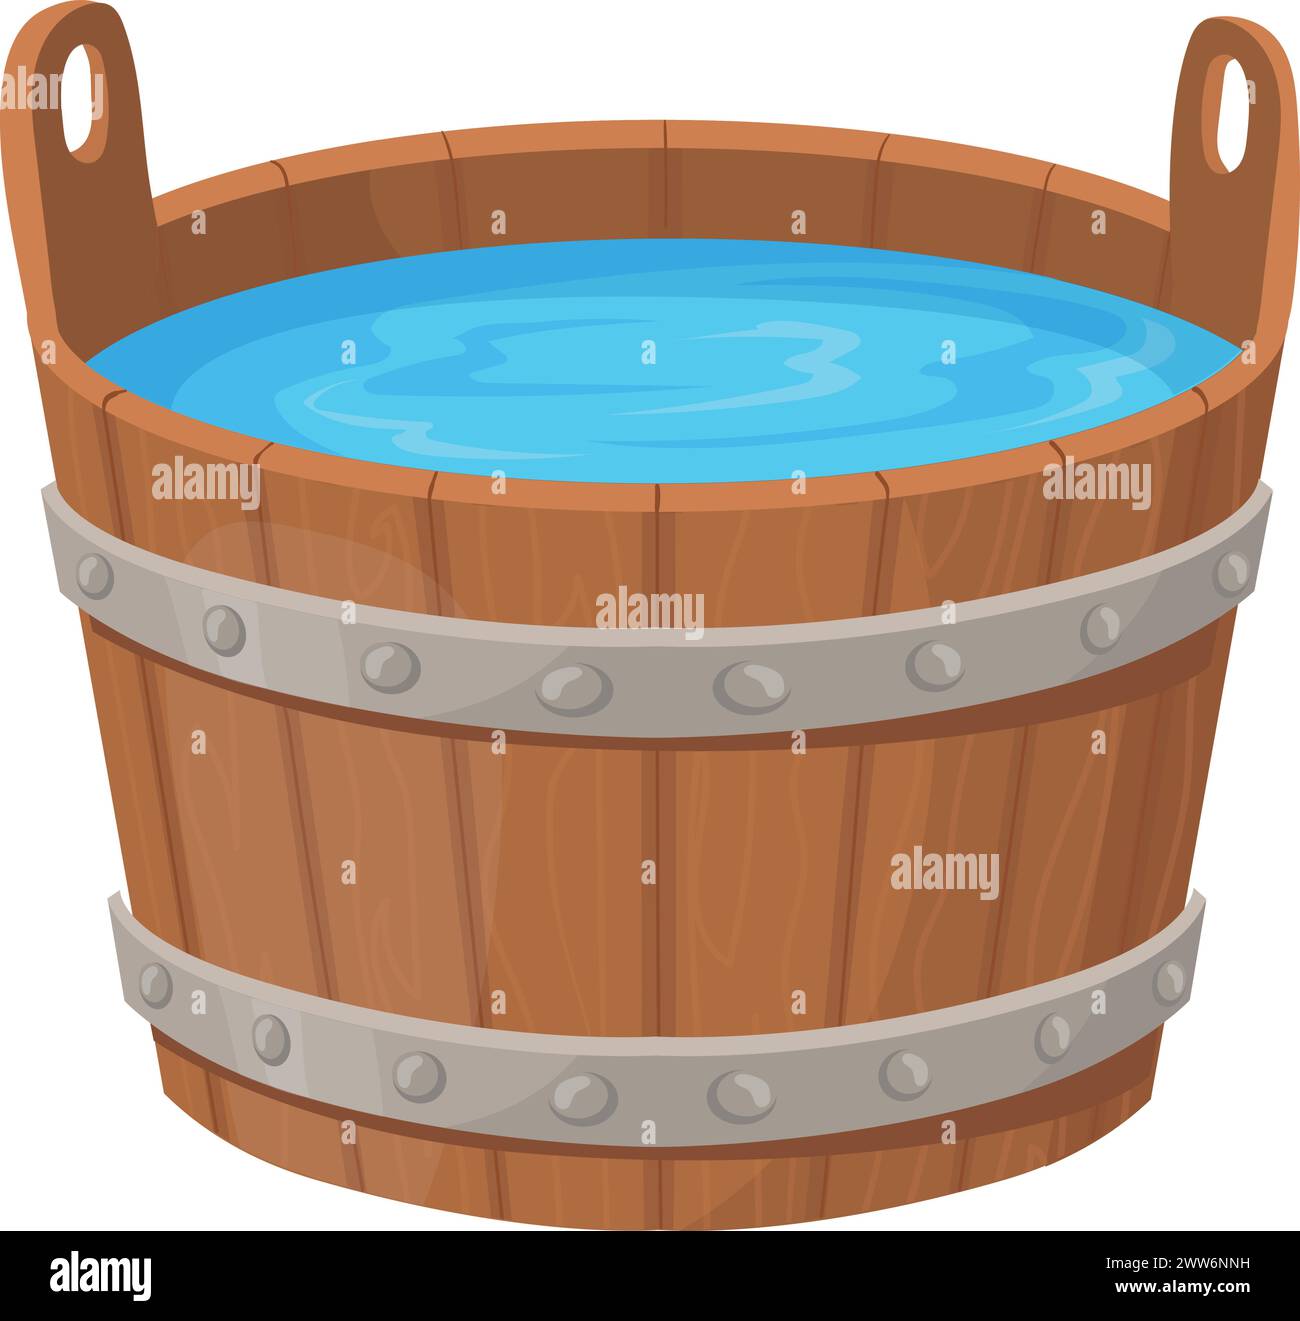 Wooden bucket full of clean water cartoon icon isolated on white background Stock Vector